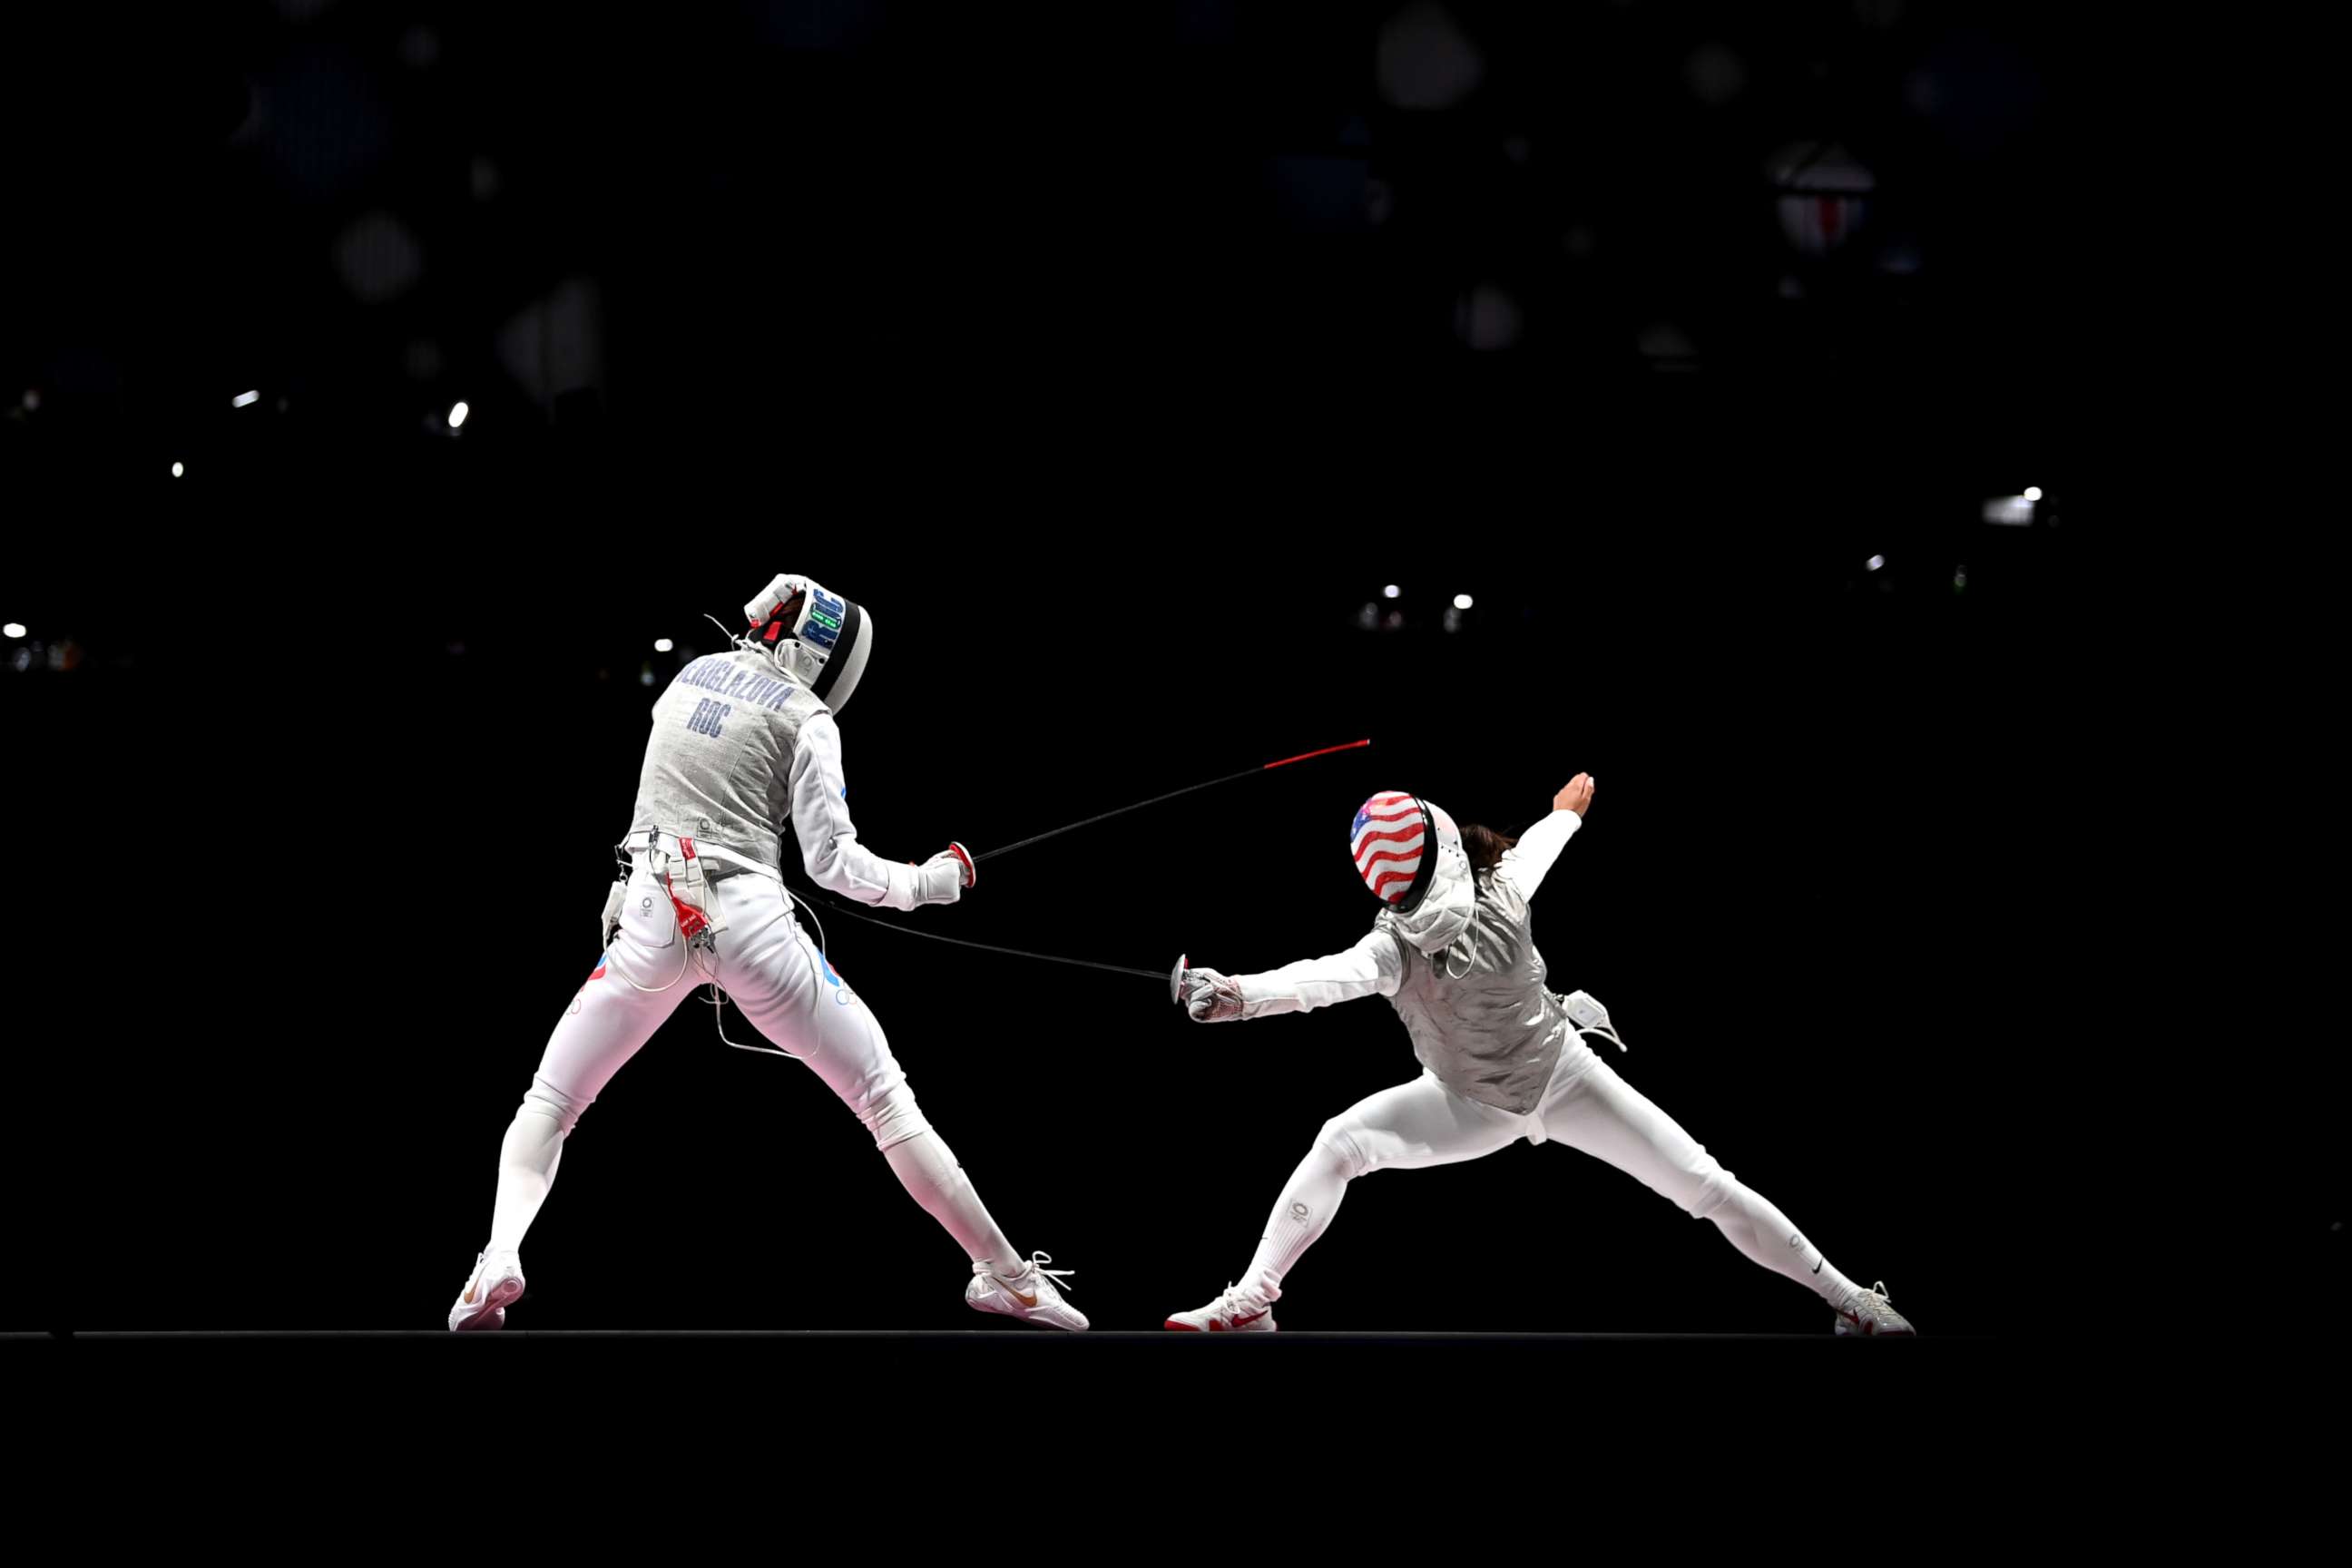 PHOTO: Inna Deriglazova of Team ROC, left, competes against Lee Kiefer of Team United States in the Women's Foil Individual Fencing Gold Medal Bout on day two of the Tokyo 2020 Olympic Games on July 25, 2021 in Chiba, Japan. 